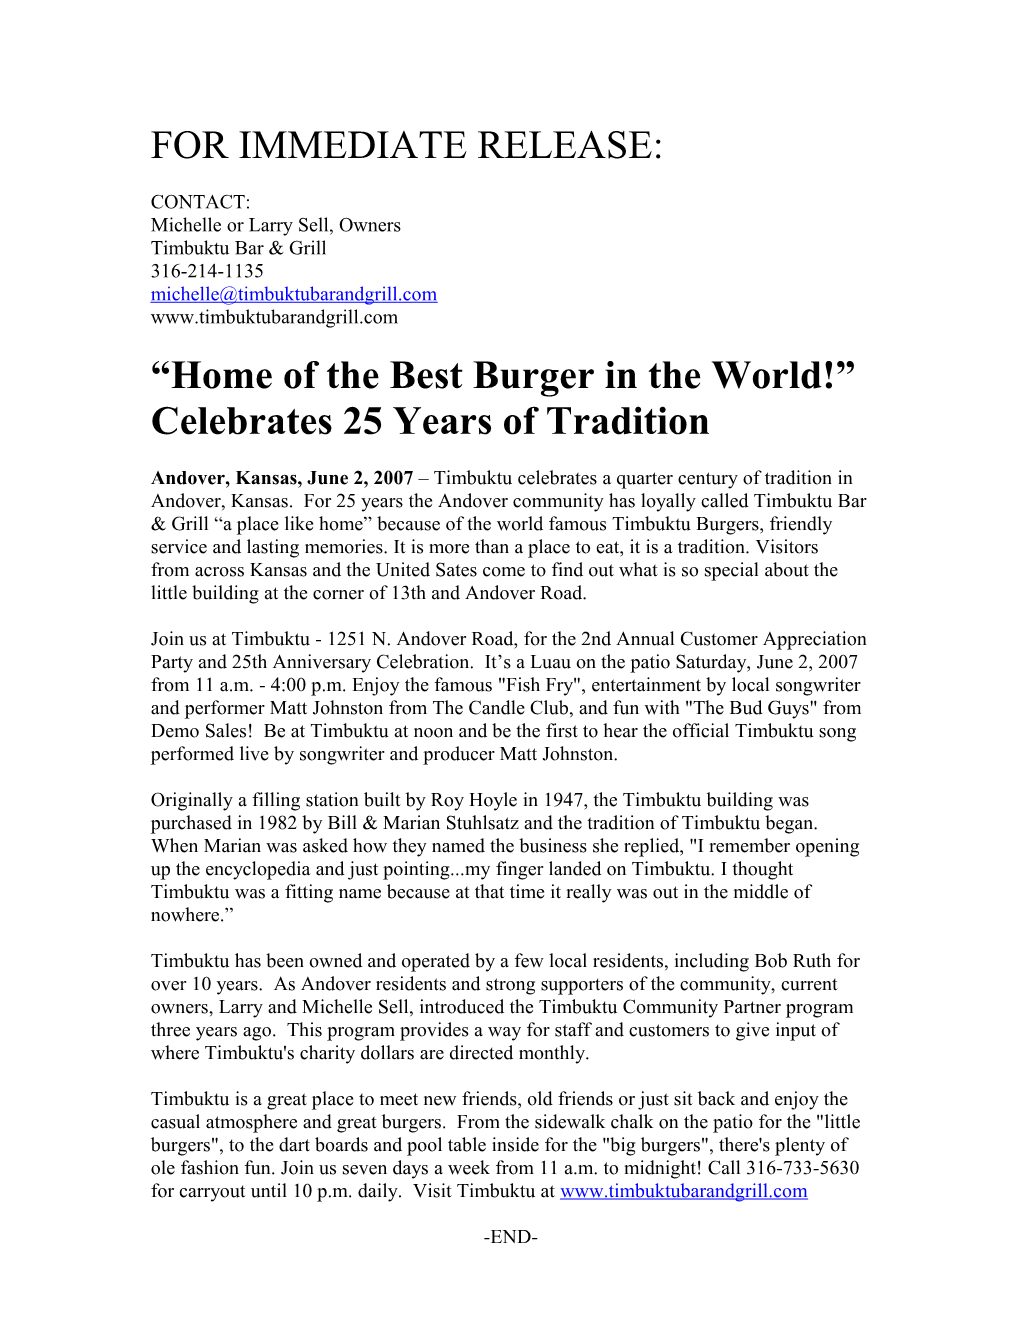 Home of the Best Burger in the World! Celebrates 25 Years of Tradition